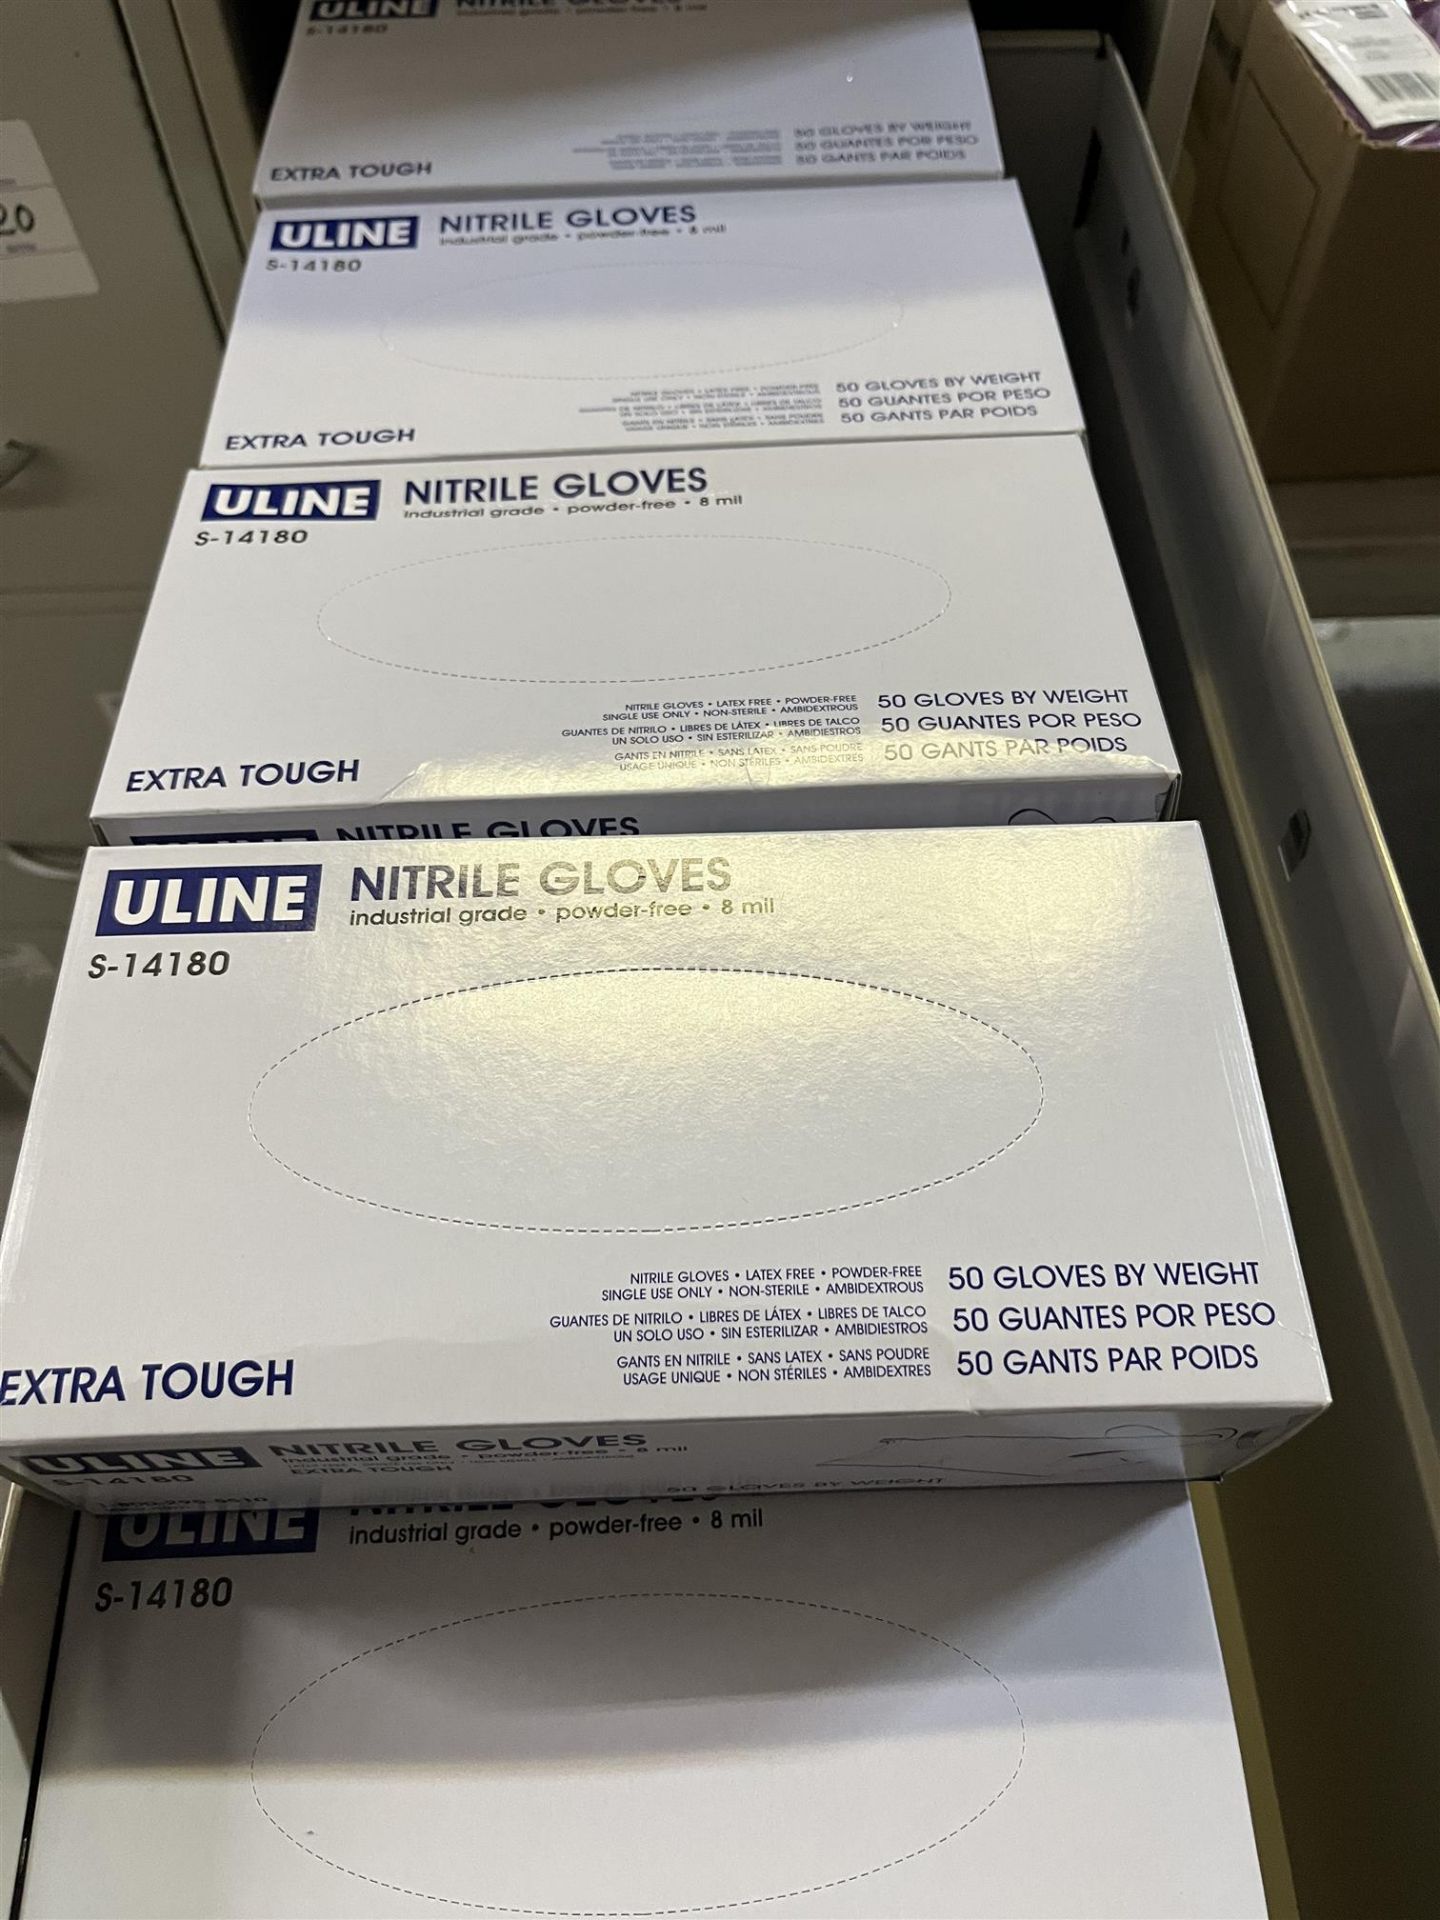 ULINE - Extra Tough Nitril Gloves - Quantity X19 - Image 2 of 2